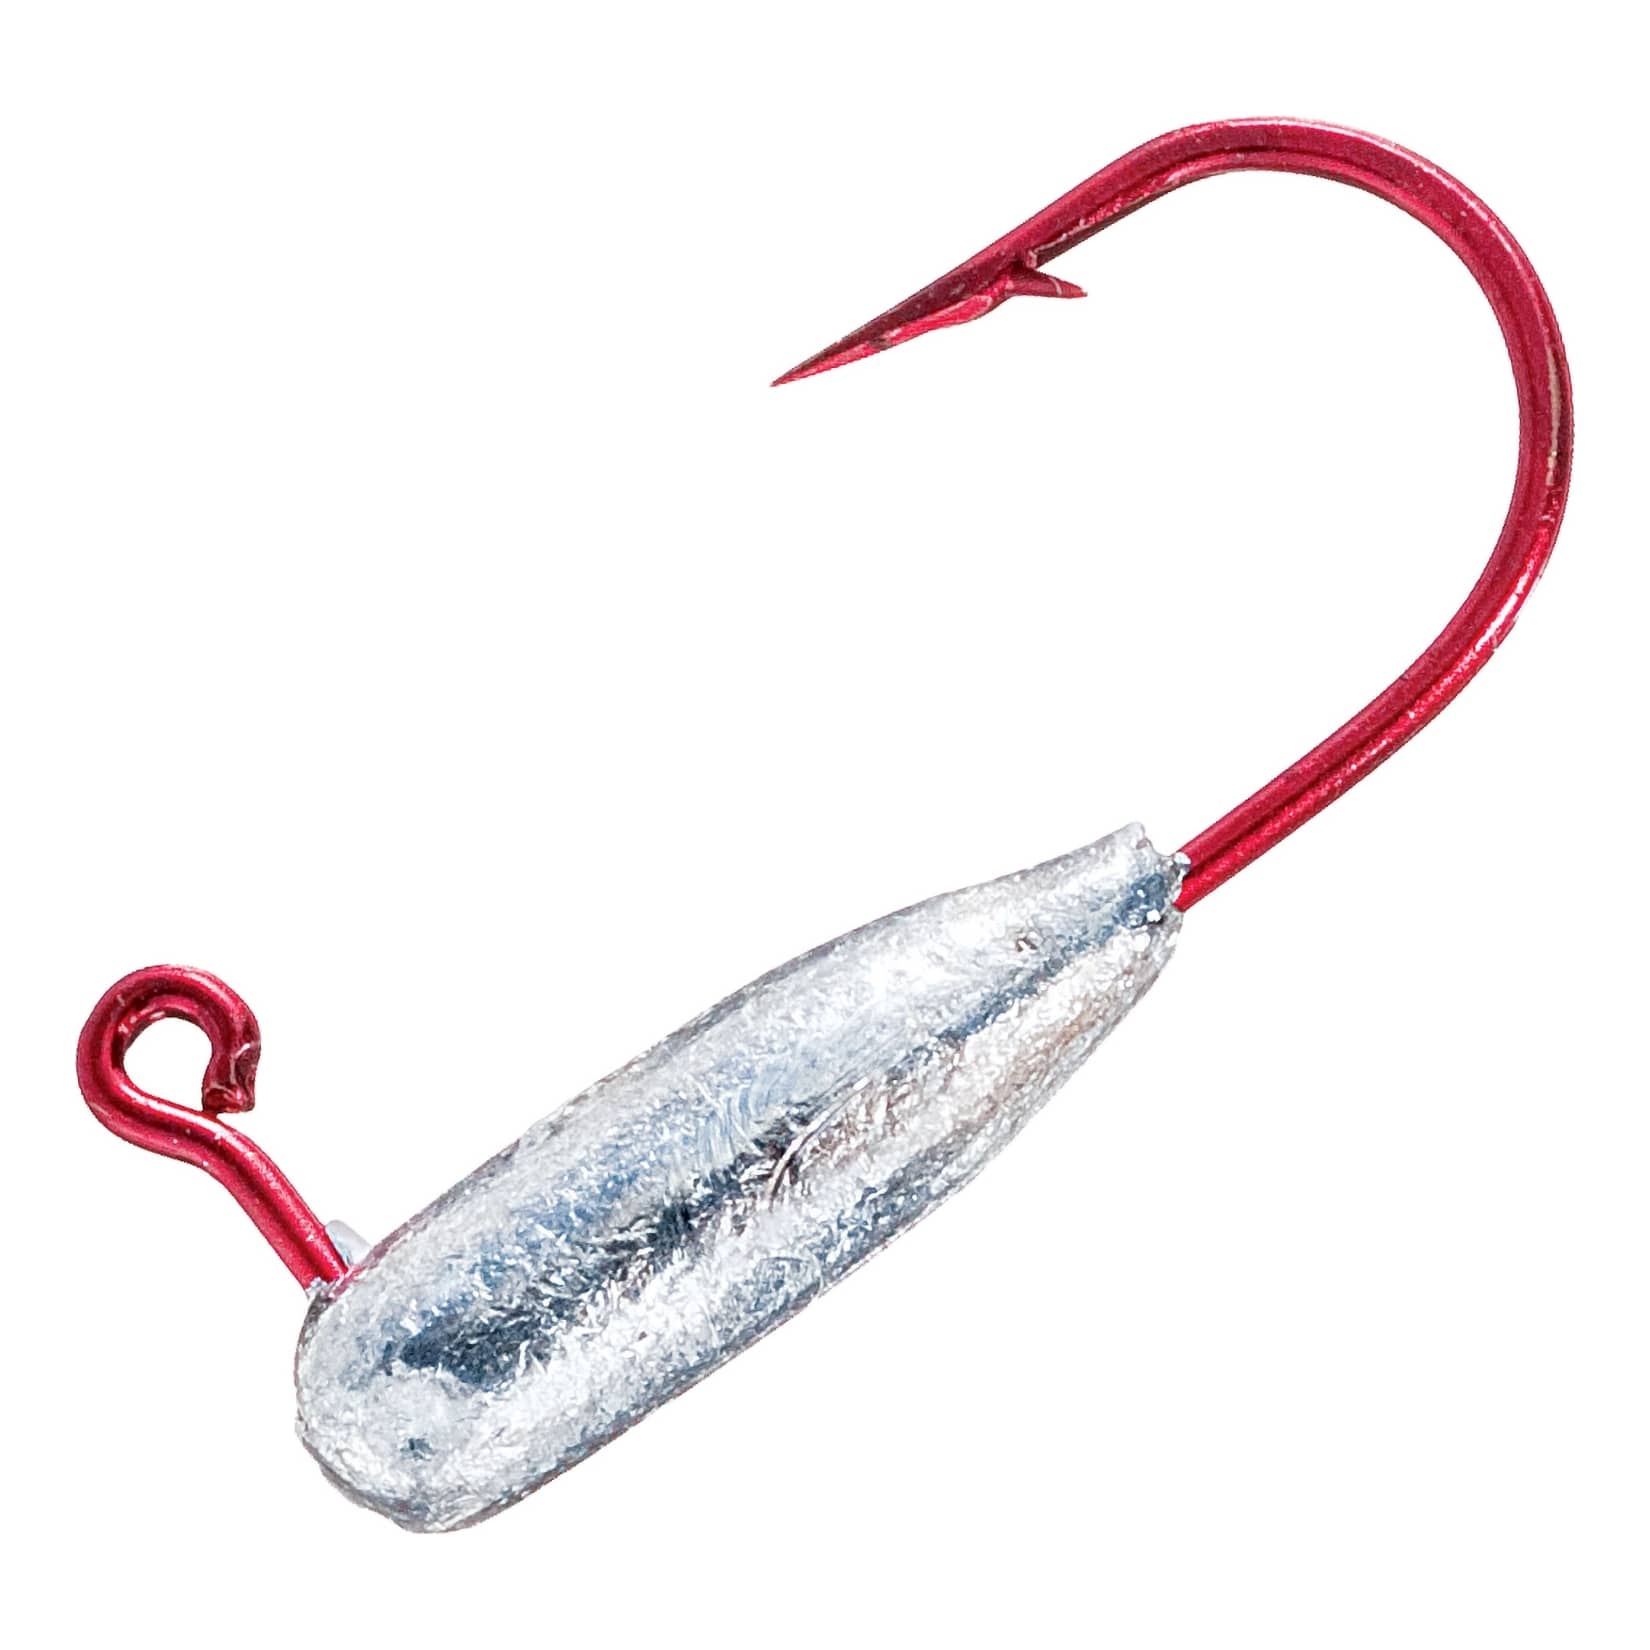 Bass Pro Shops® Squirt Head with Red Hook Lead Heads